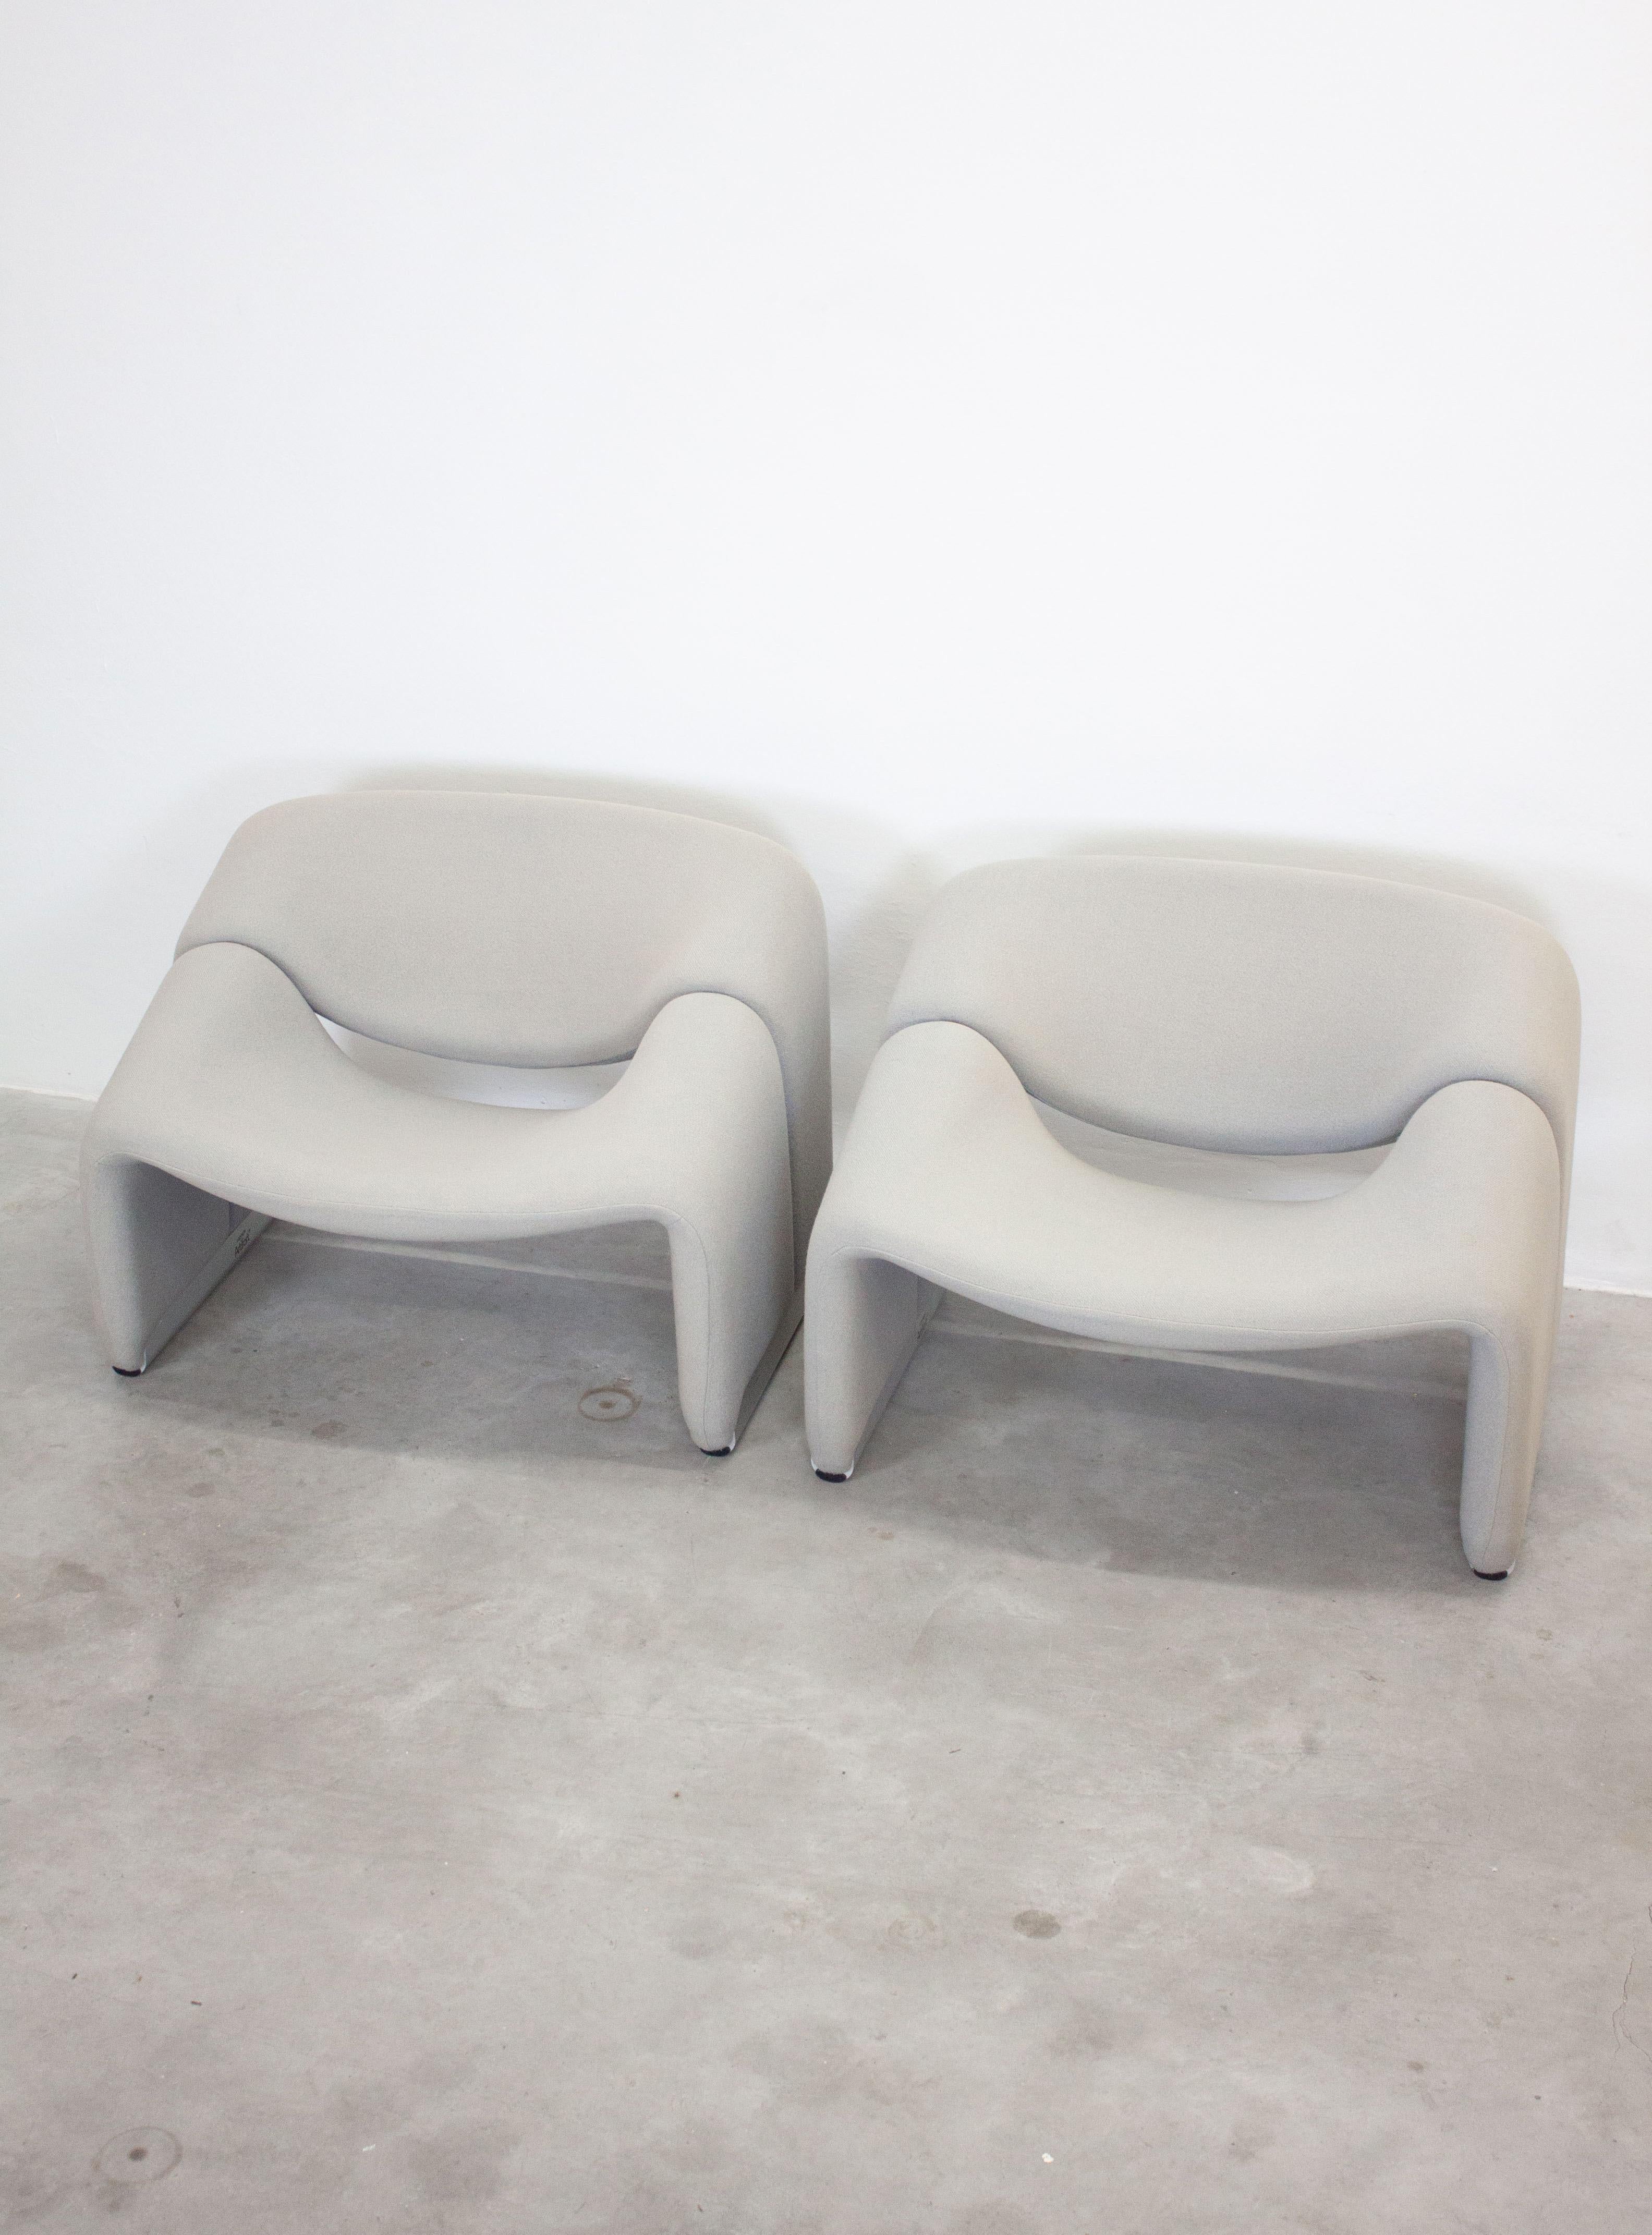 Artifort Groovy F598 or M lounge chairs by Pierre Paulin in this beautiful light grey colour. Paulin designed these in 1960 for Castelli - Italy. Dutch manufacturer Artifort was licensed to produce them as well, where these were made. These chairs